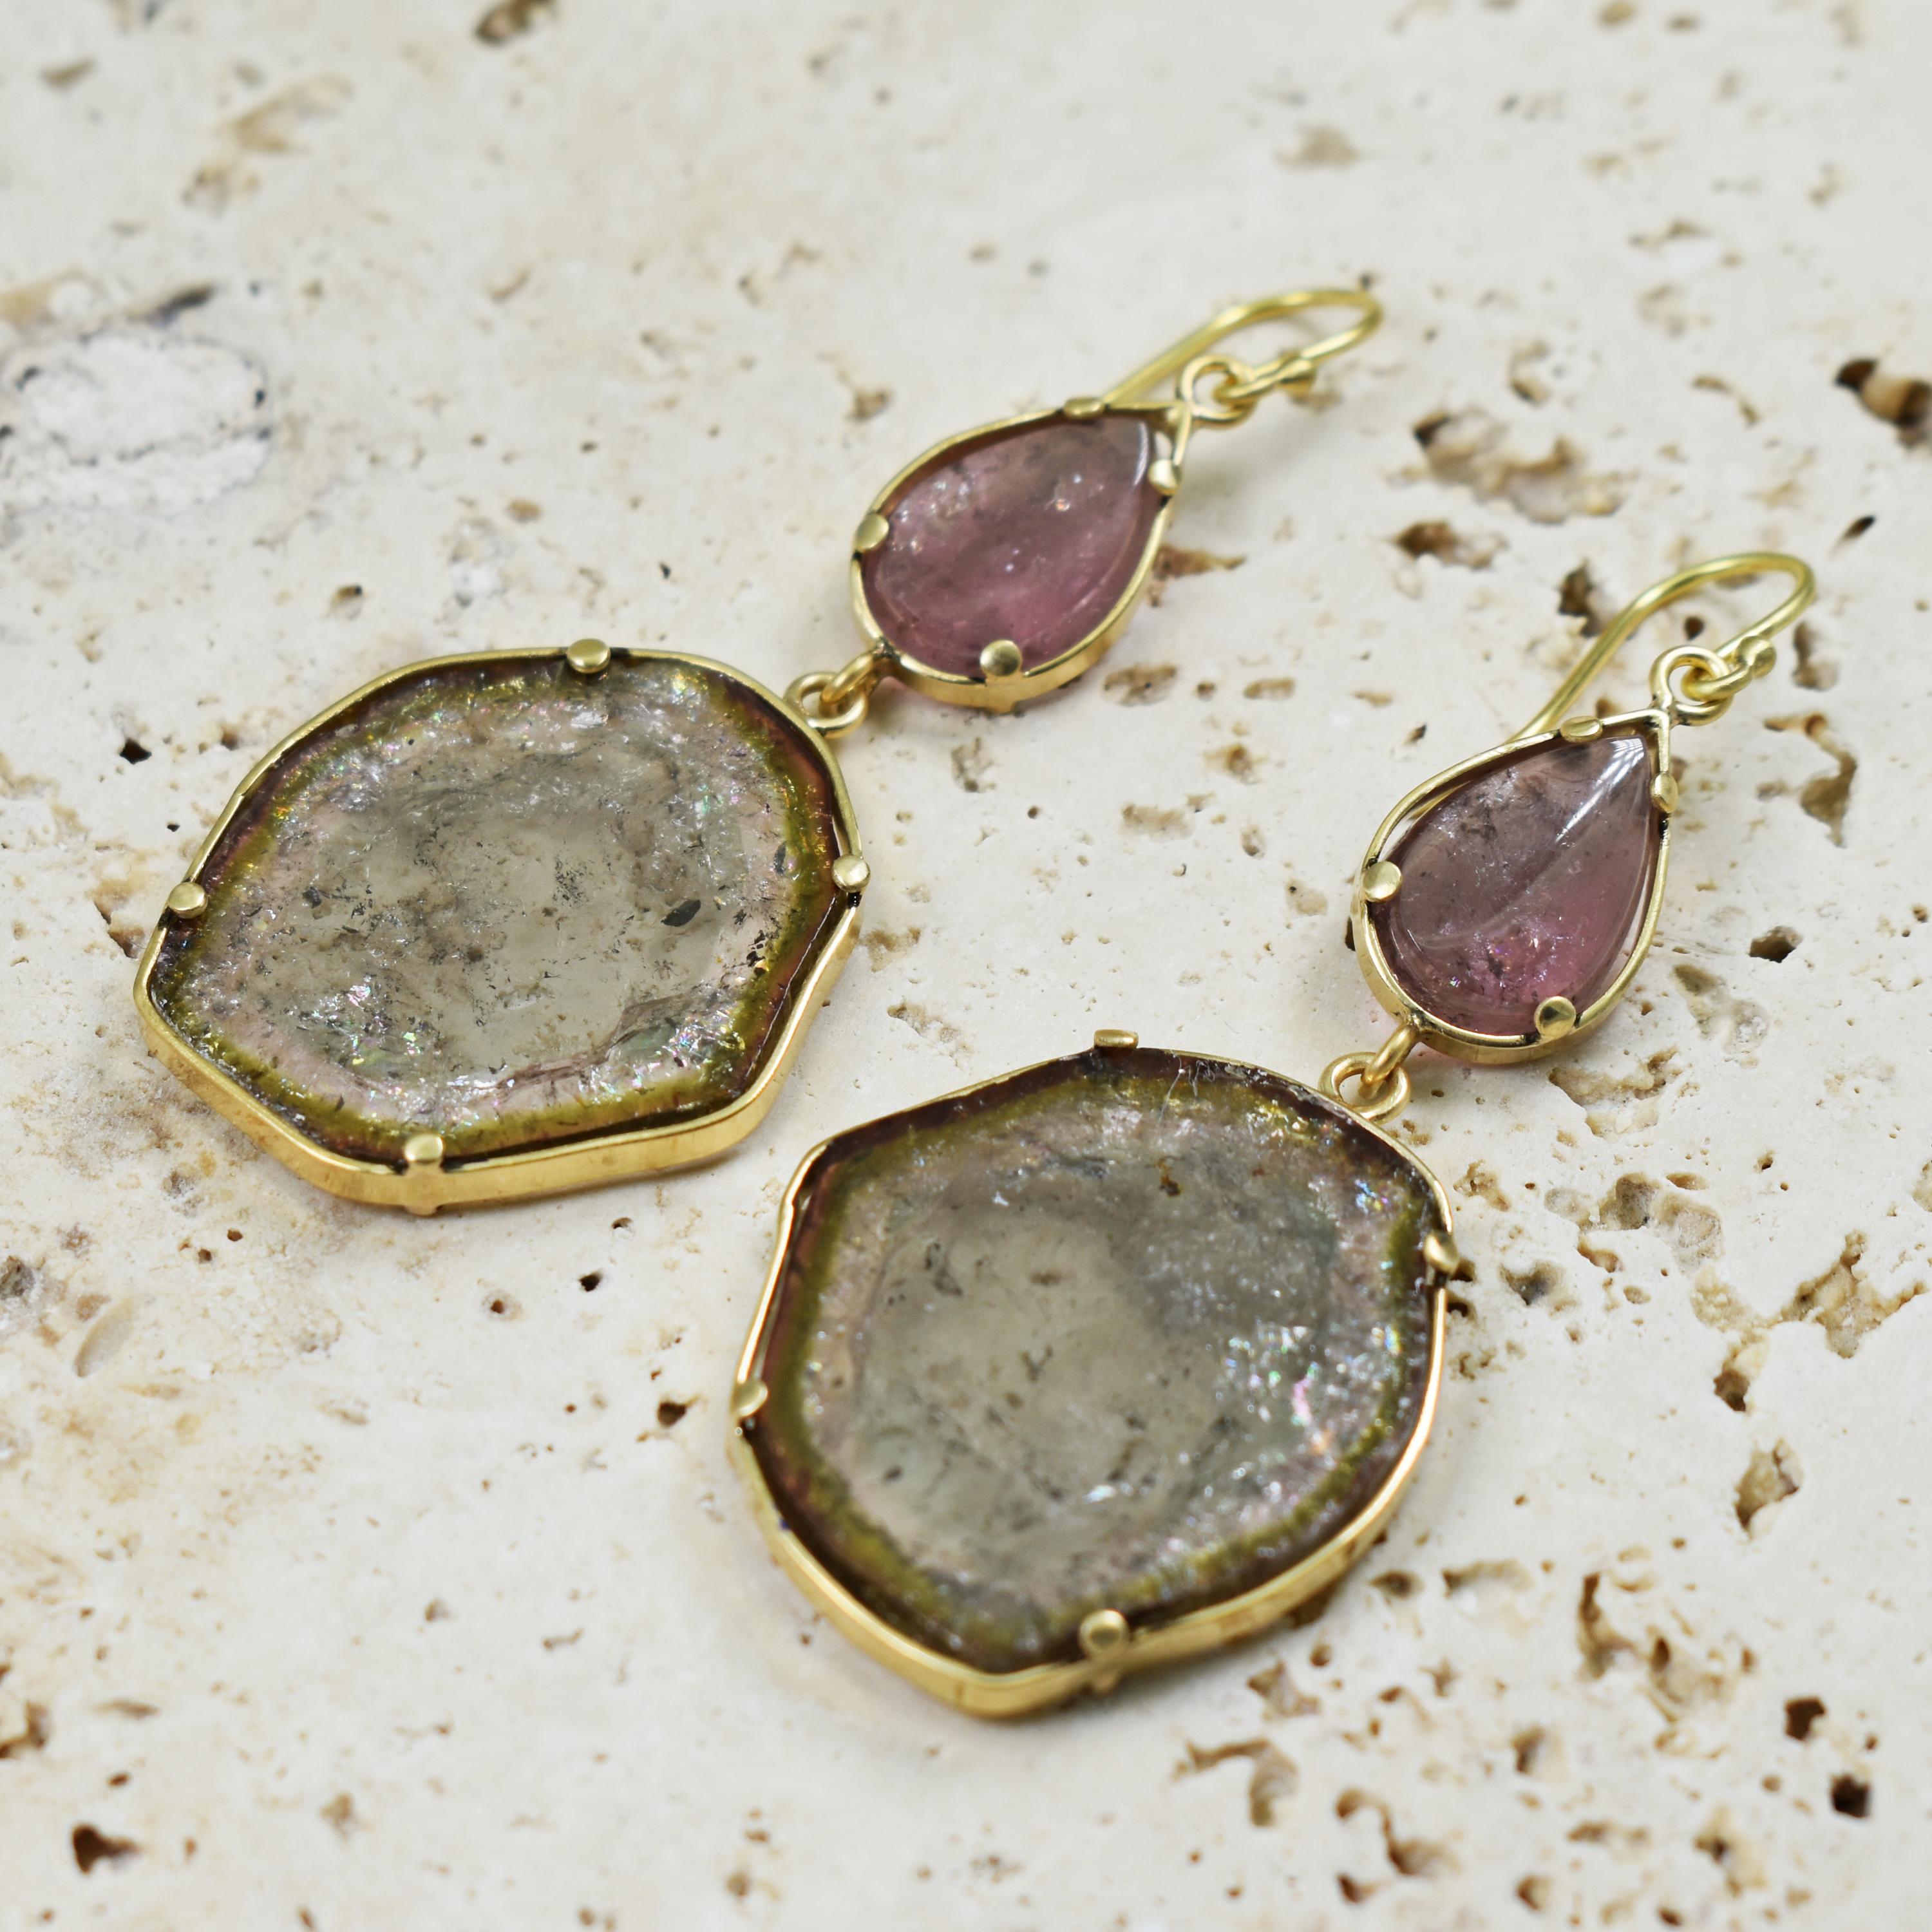 Pink Tourmaline pear-shaped cabochons and Watermelon Tourmaline slice gemstones from Russia set in hand-fabricated 18k yellow gold dangle earrings. Dangle earrings are 3 inches in length. Unique and beautiful Tourmaline in these one-of-a-kind,